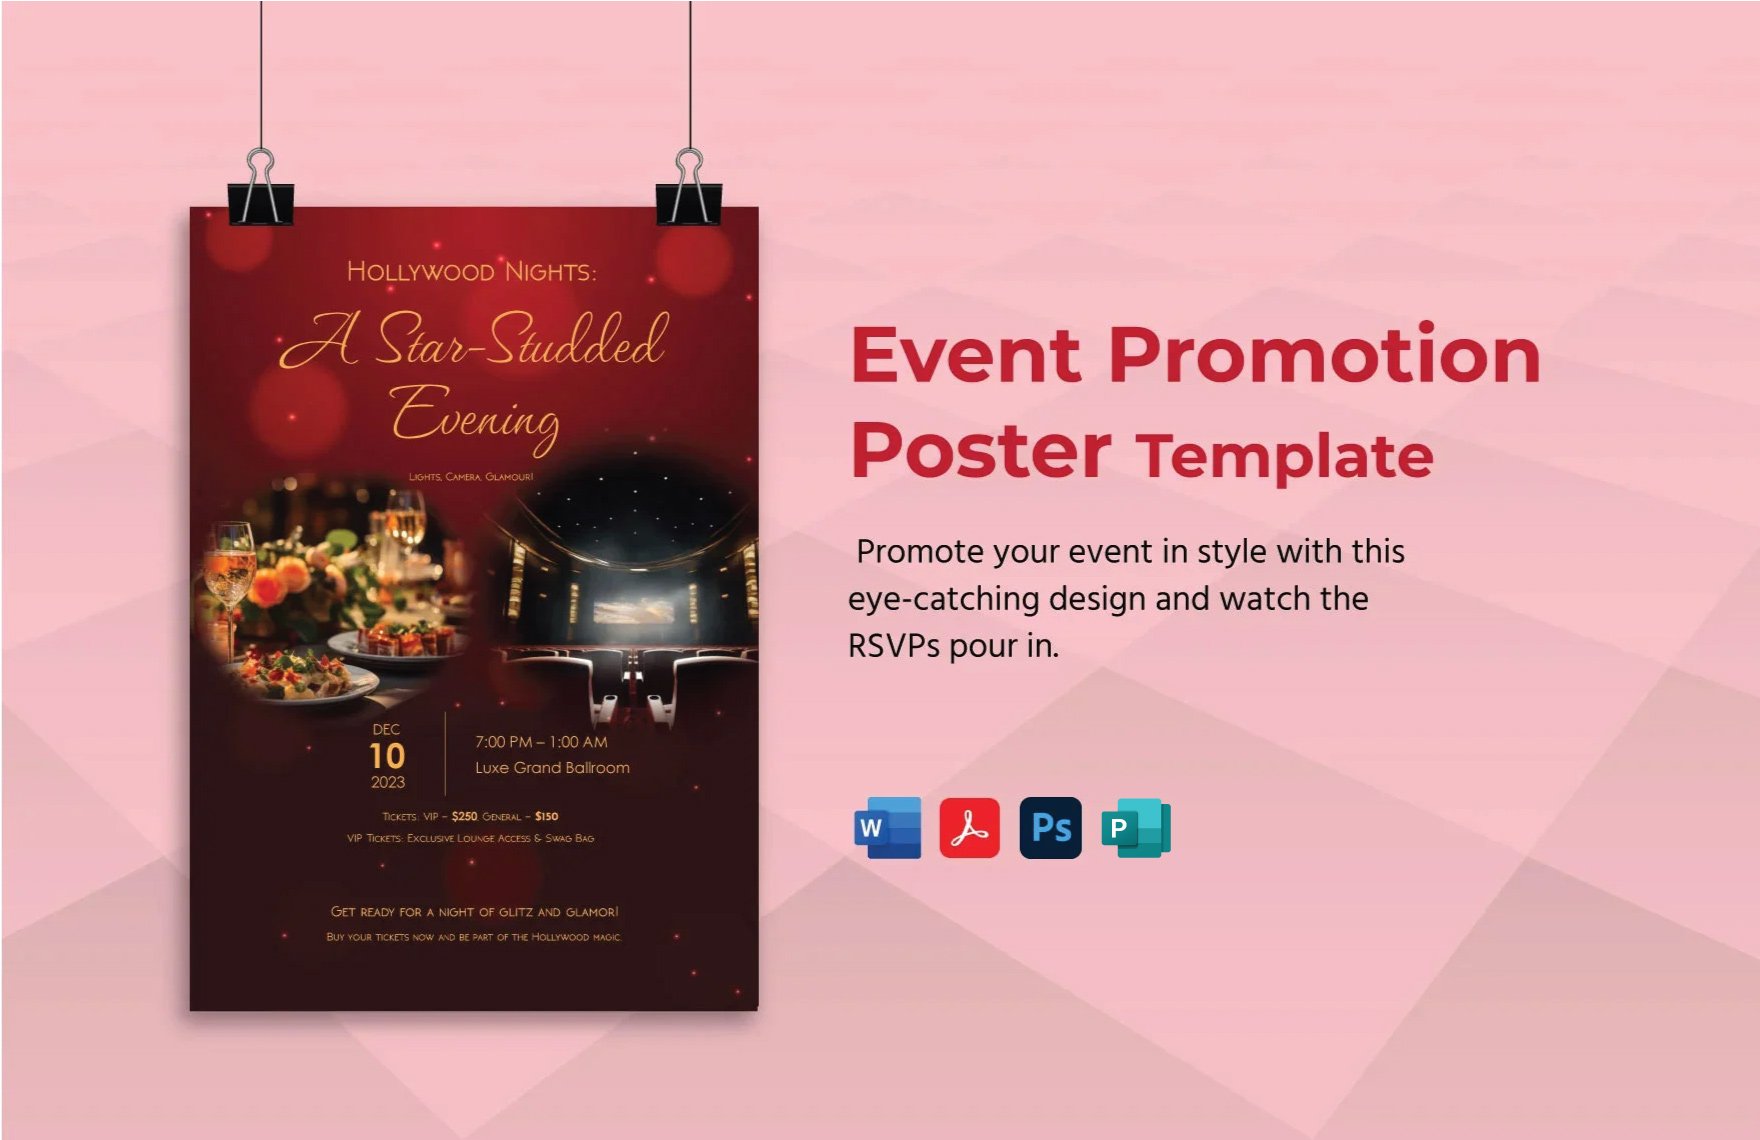 Event Promotion Poster Template